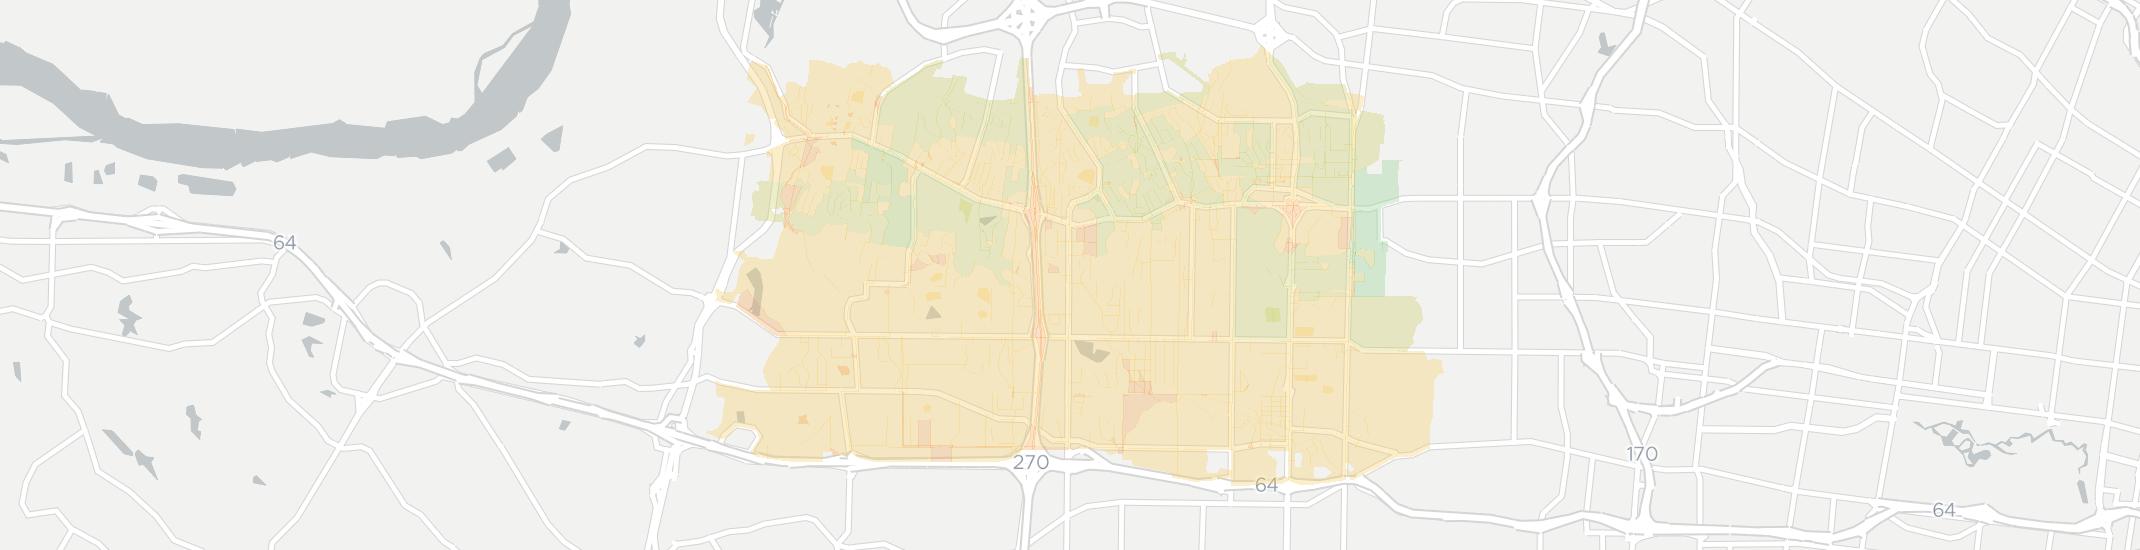 Creve Coeur Internet Competition Map. Click for interactive map.